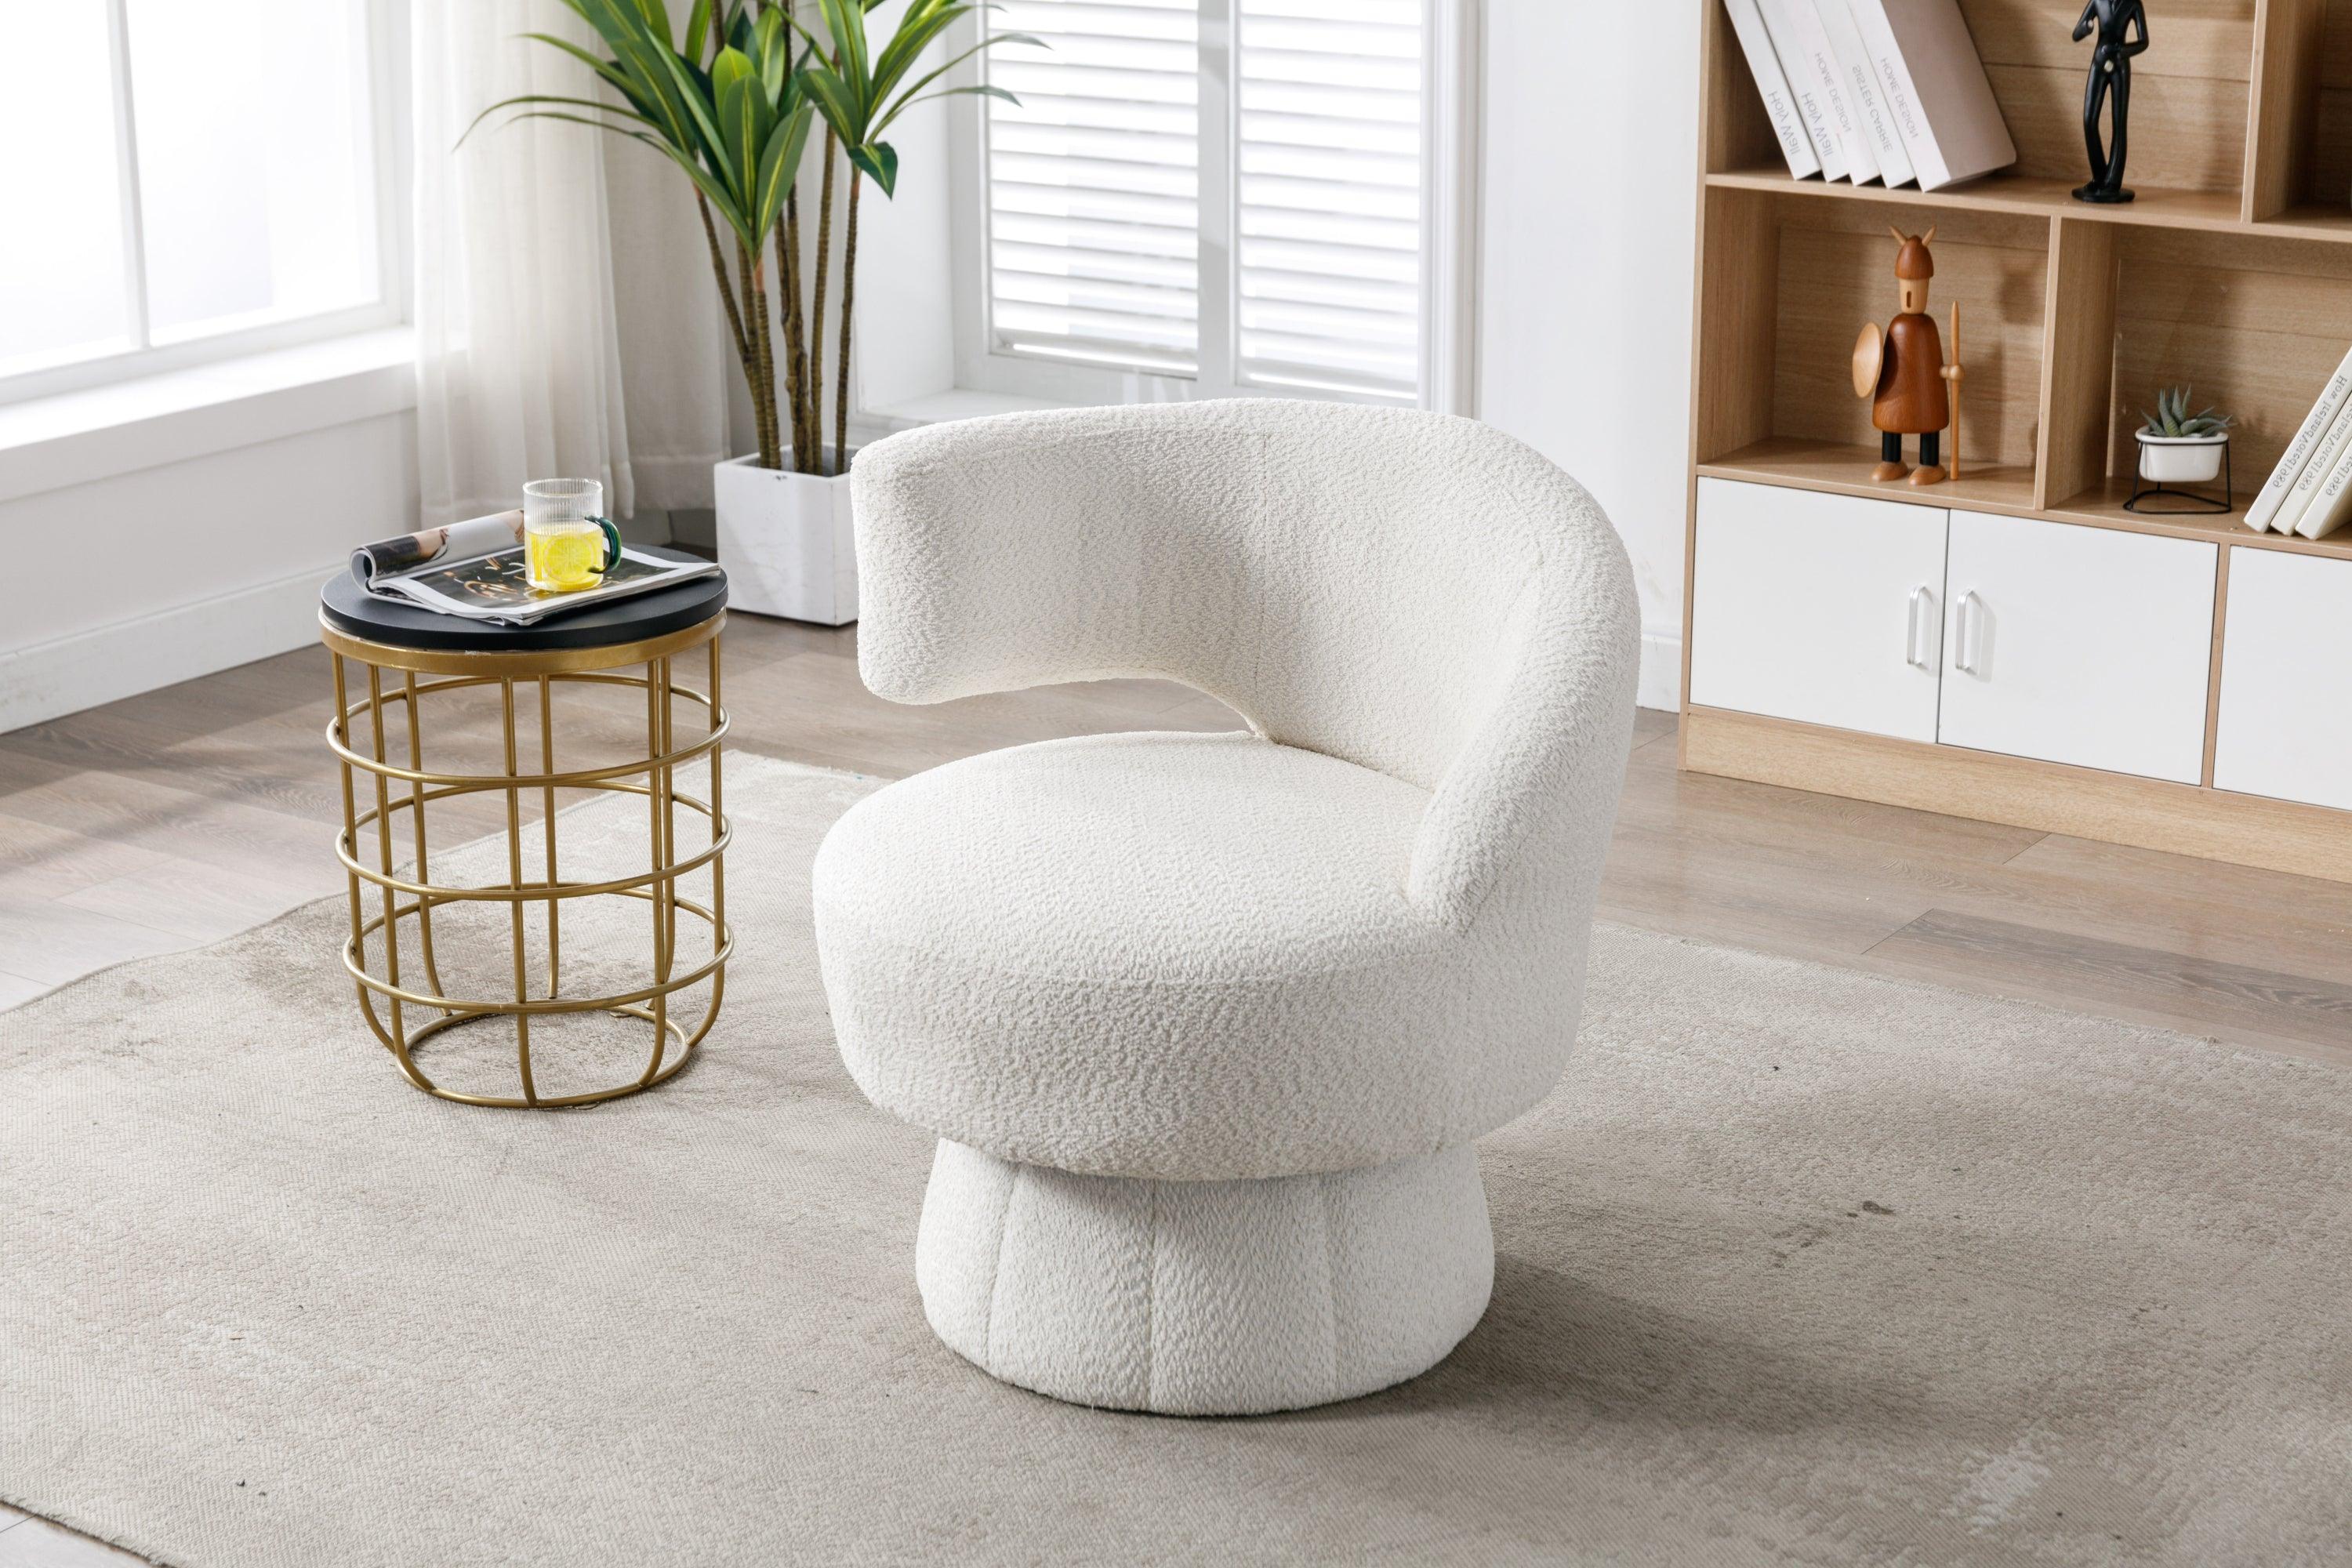 360 Degree Swivel Cuddle Barrel Accent  Chairs, Round Armchairs with Wide Upholstered, Fluffy  Fabric Chair for Living Room, Bedroom, Office, Waiting Rooms LamCham